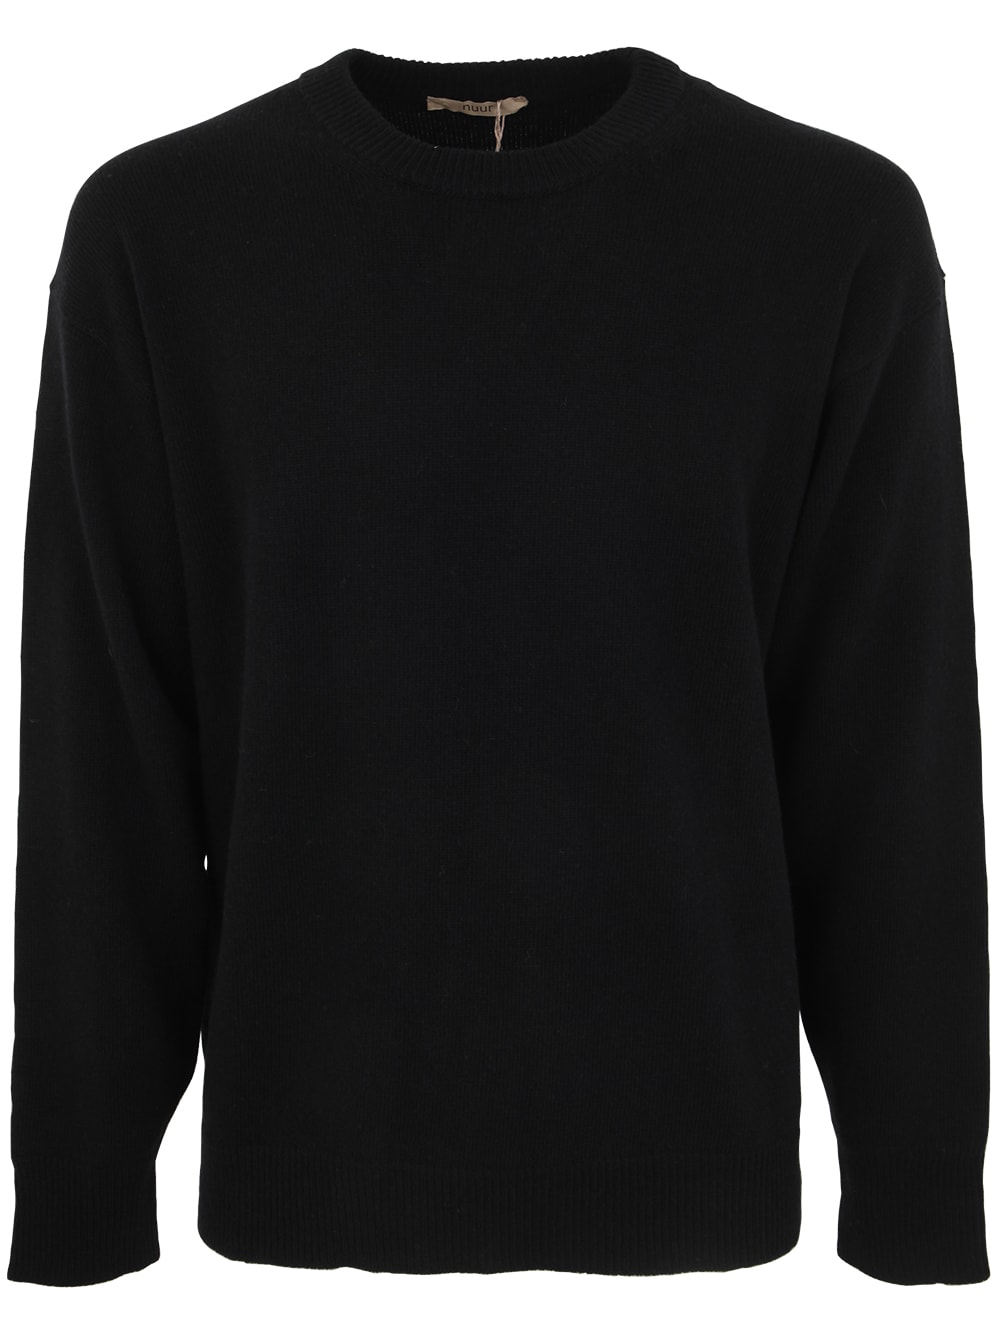 Comfort Fit Long Sleeves Crew Neck Sweater